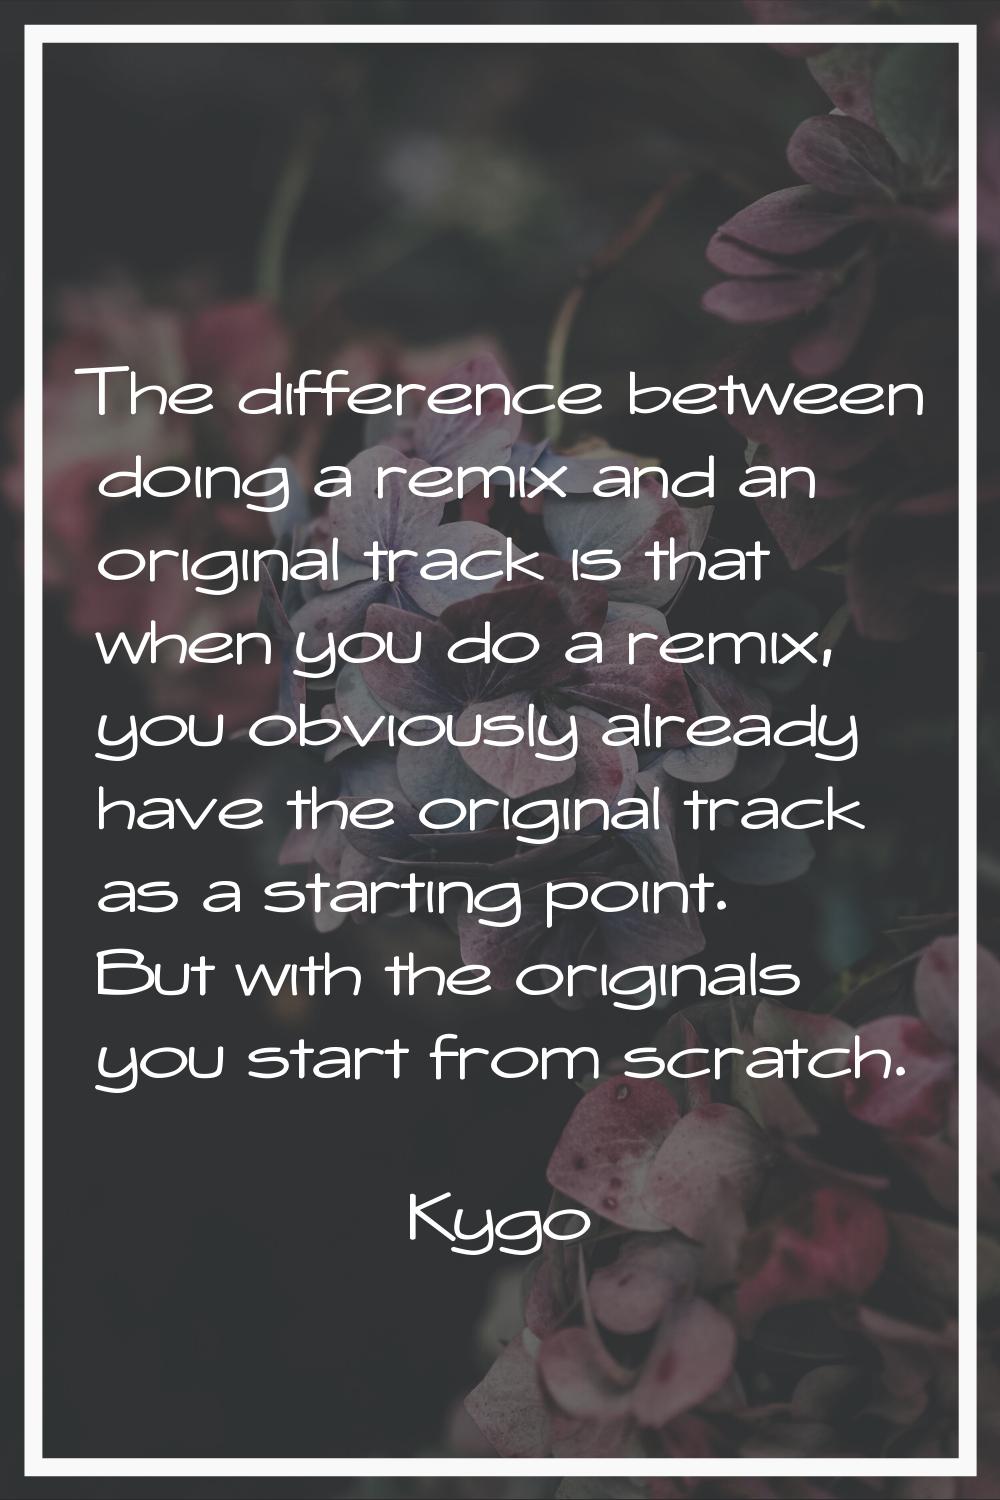 The difference between doing a remix and an original track is that when you do a remix, you obvious